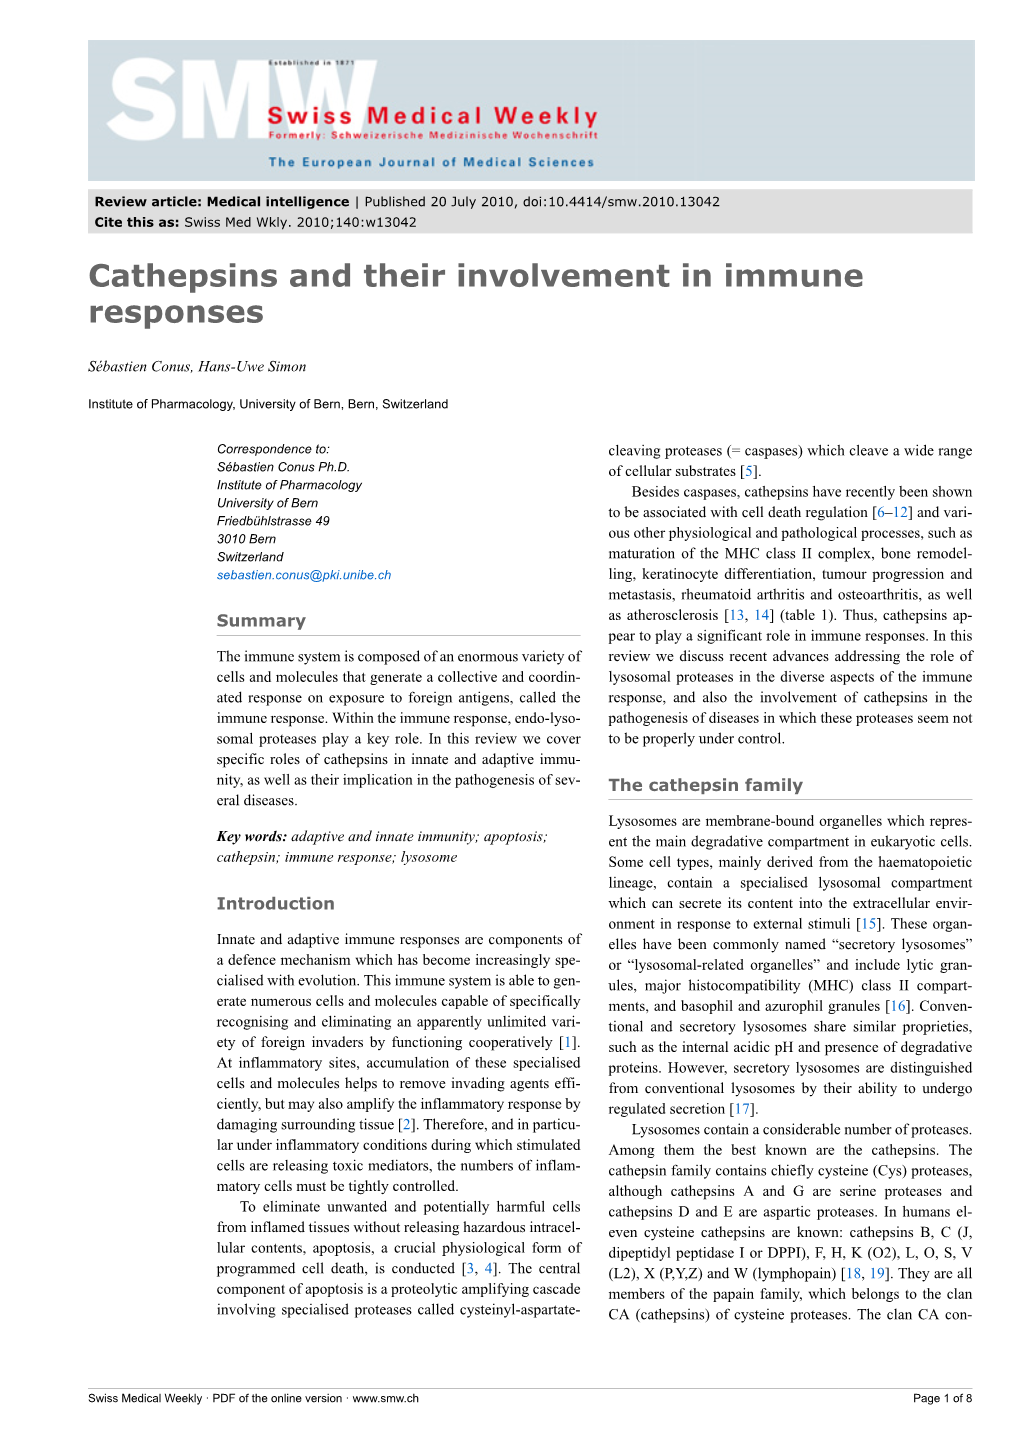 Cathepsins and Their Involvement in Immune Responses